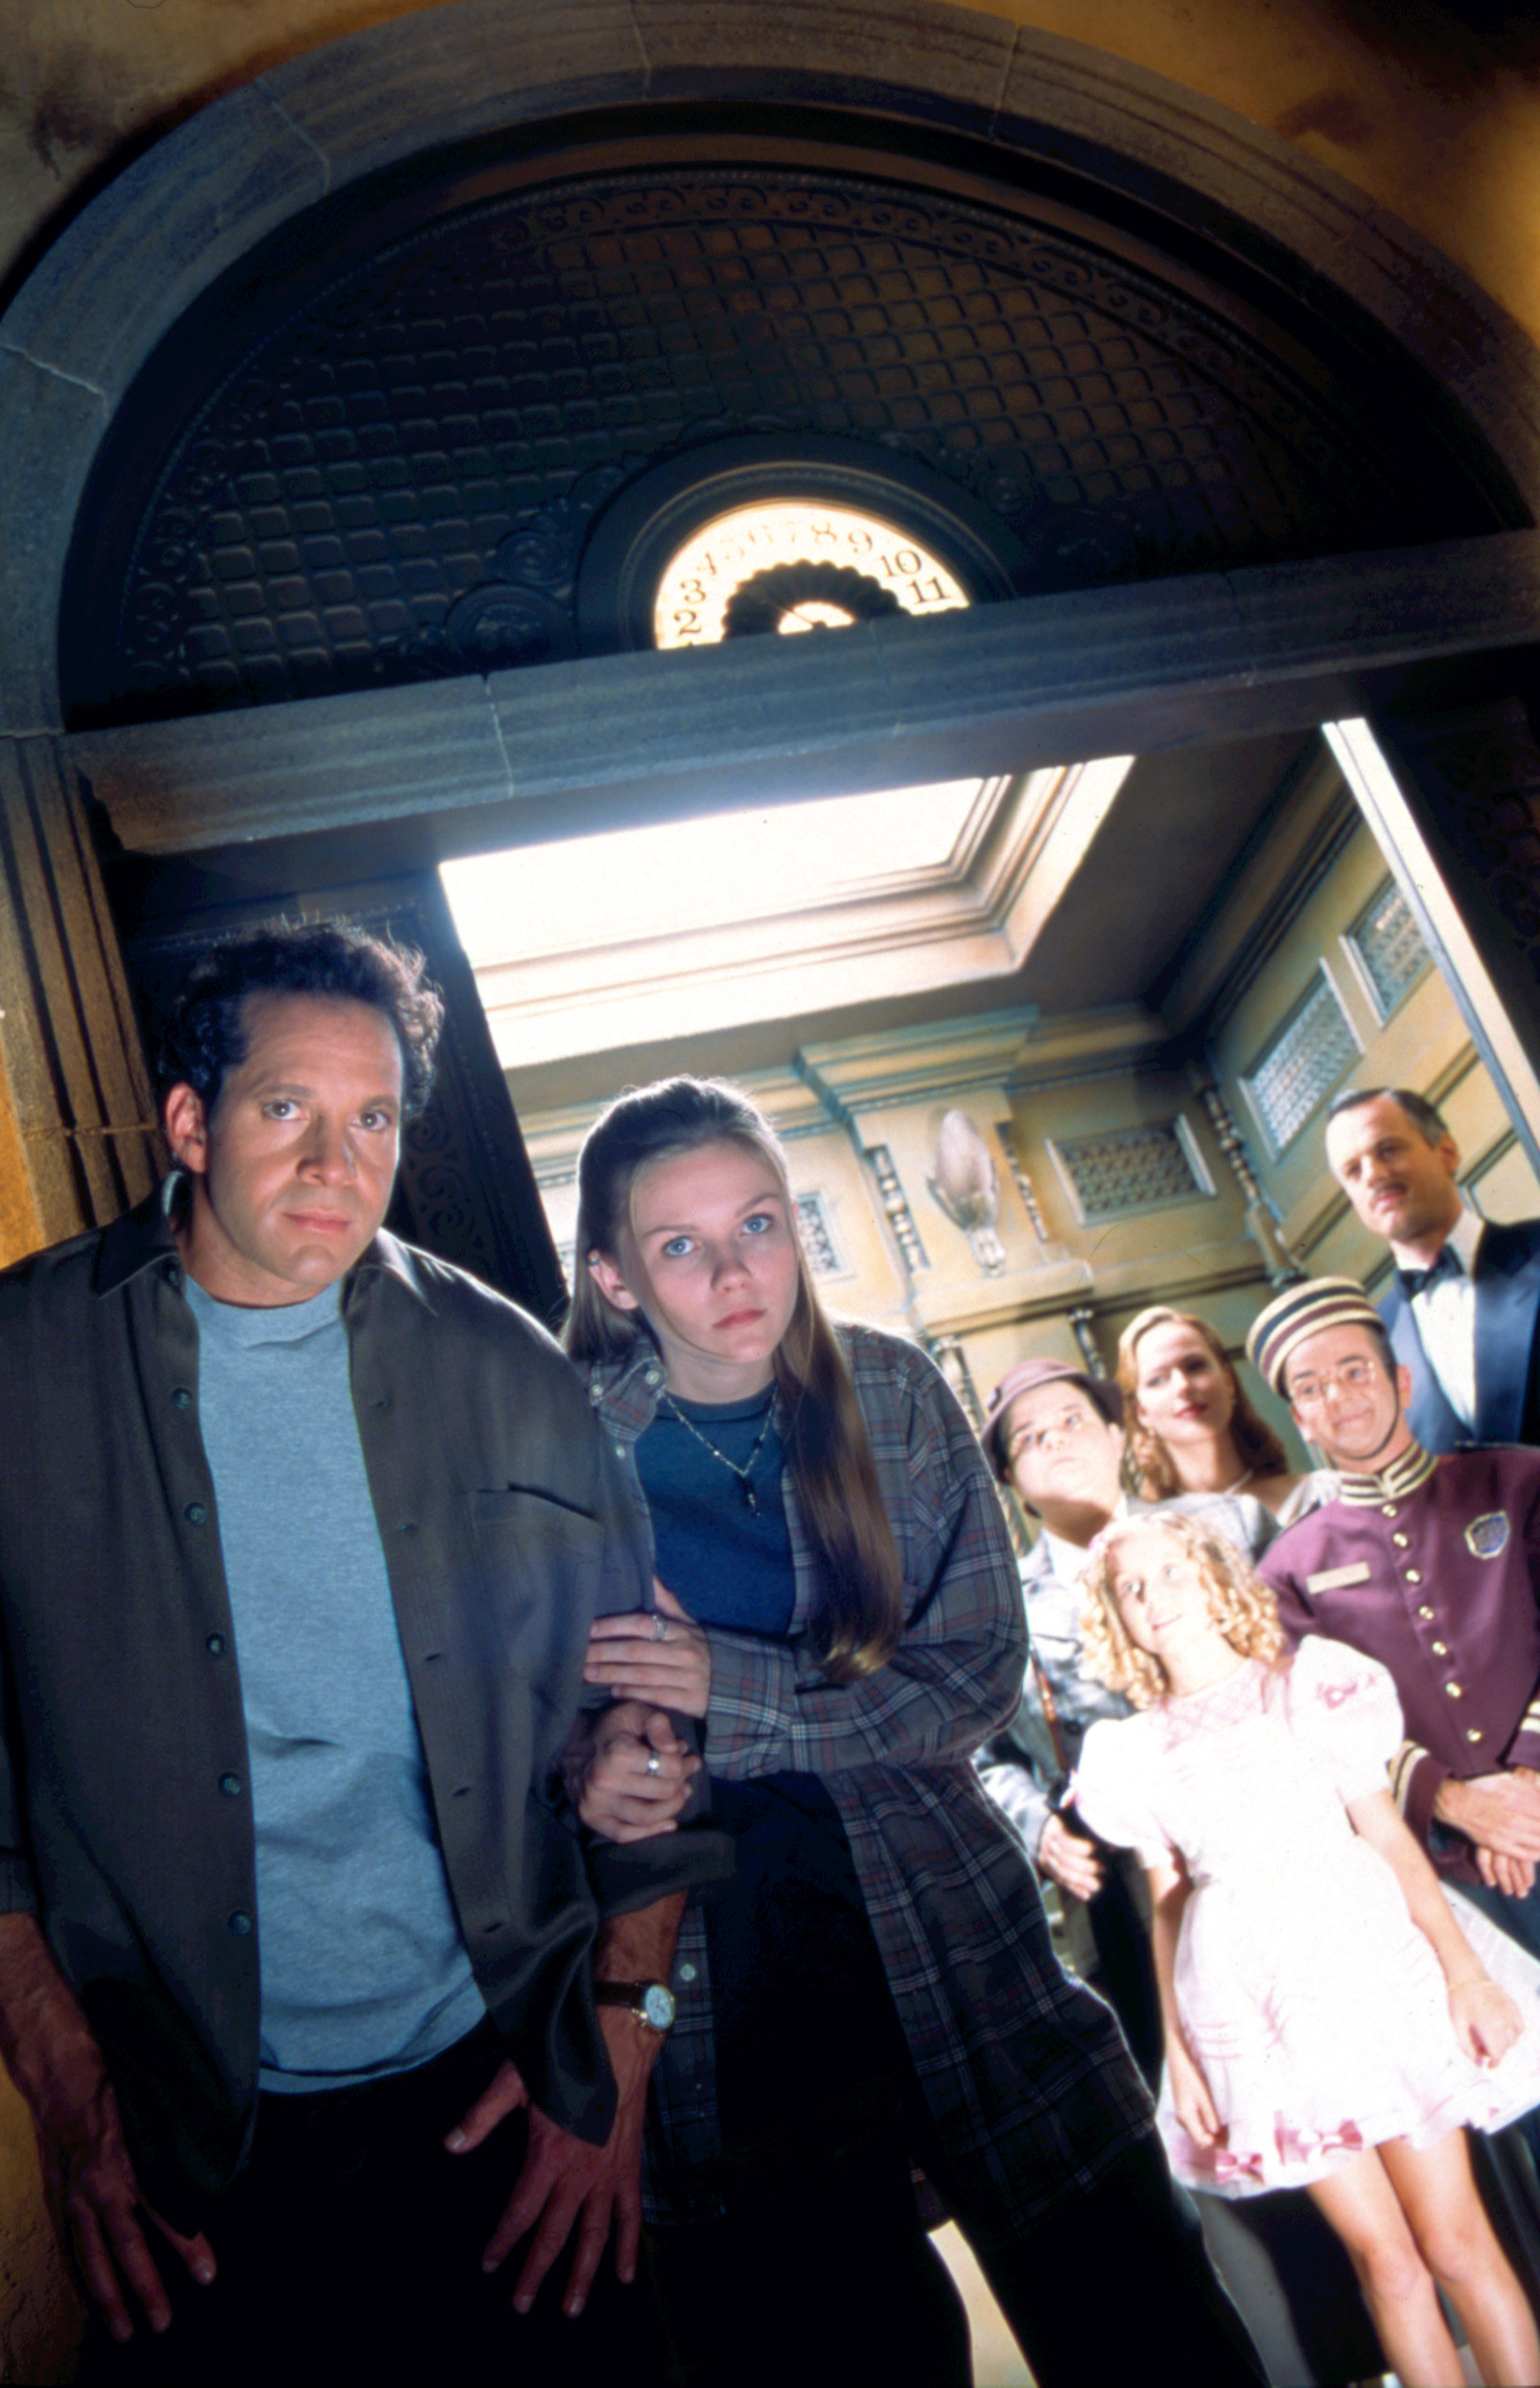 promo shot for the film with Buzzy and Anna outside the elevator of the five ghosts from the hotel